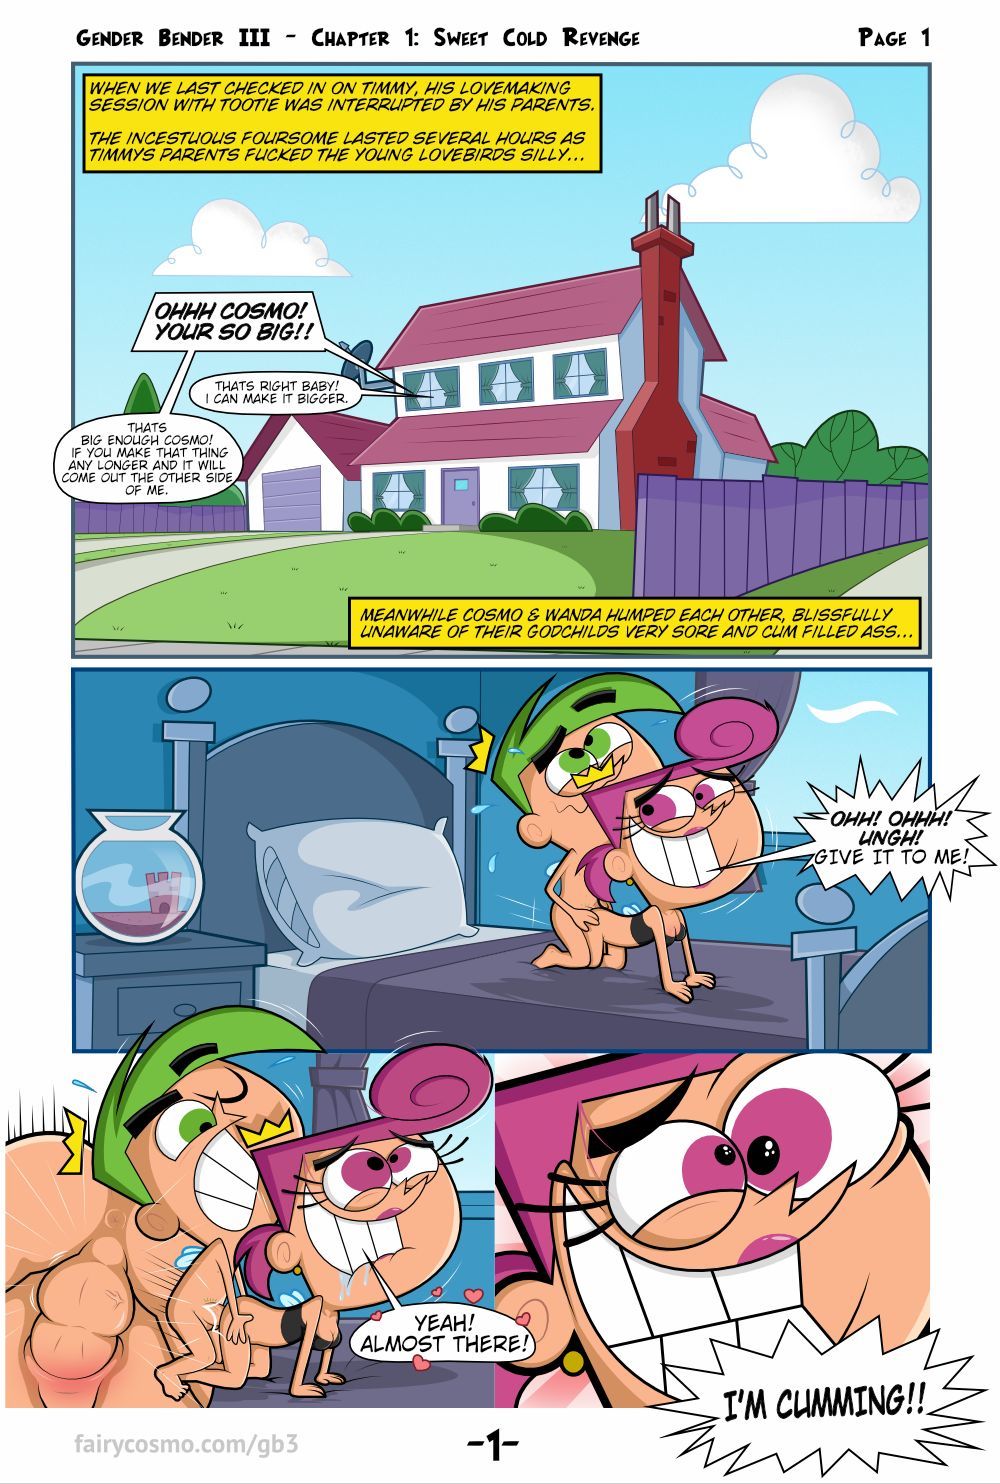 Gender Bender III Fairly Odd Parents by FairyCosmo page 2